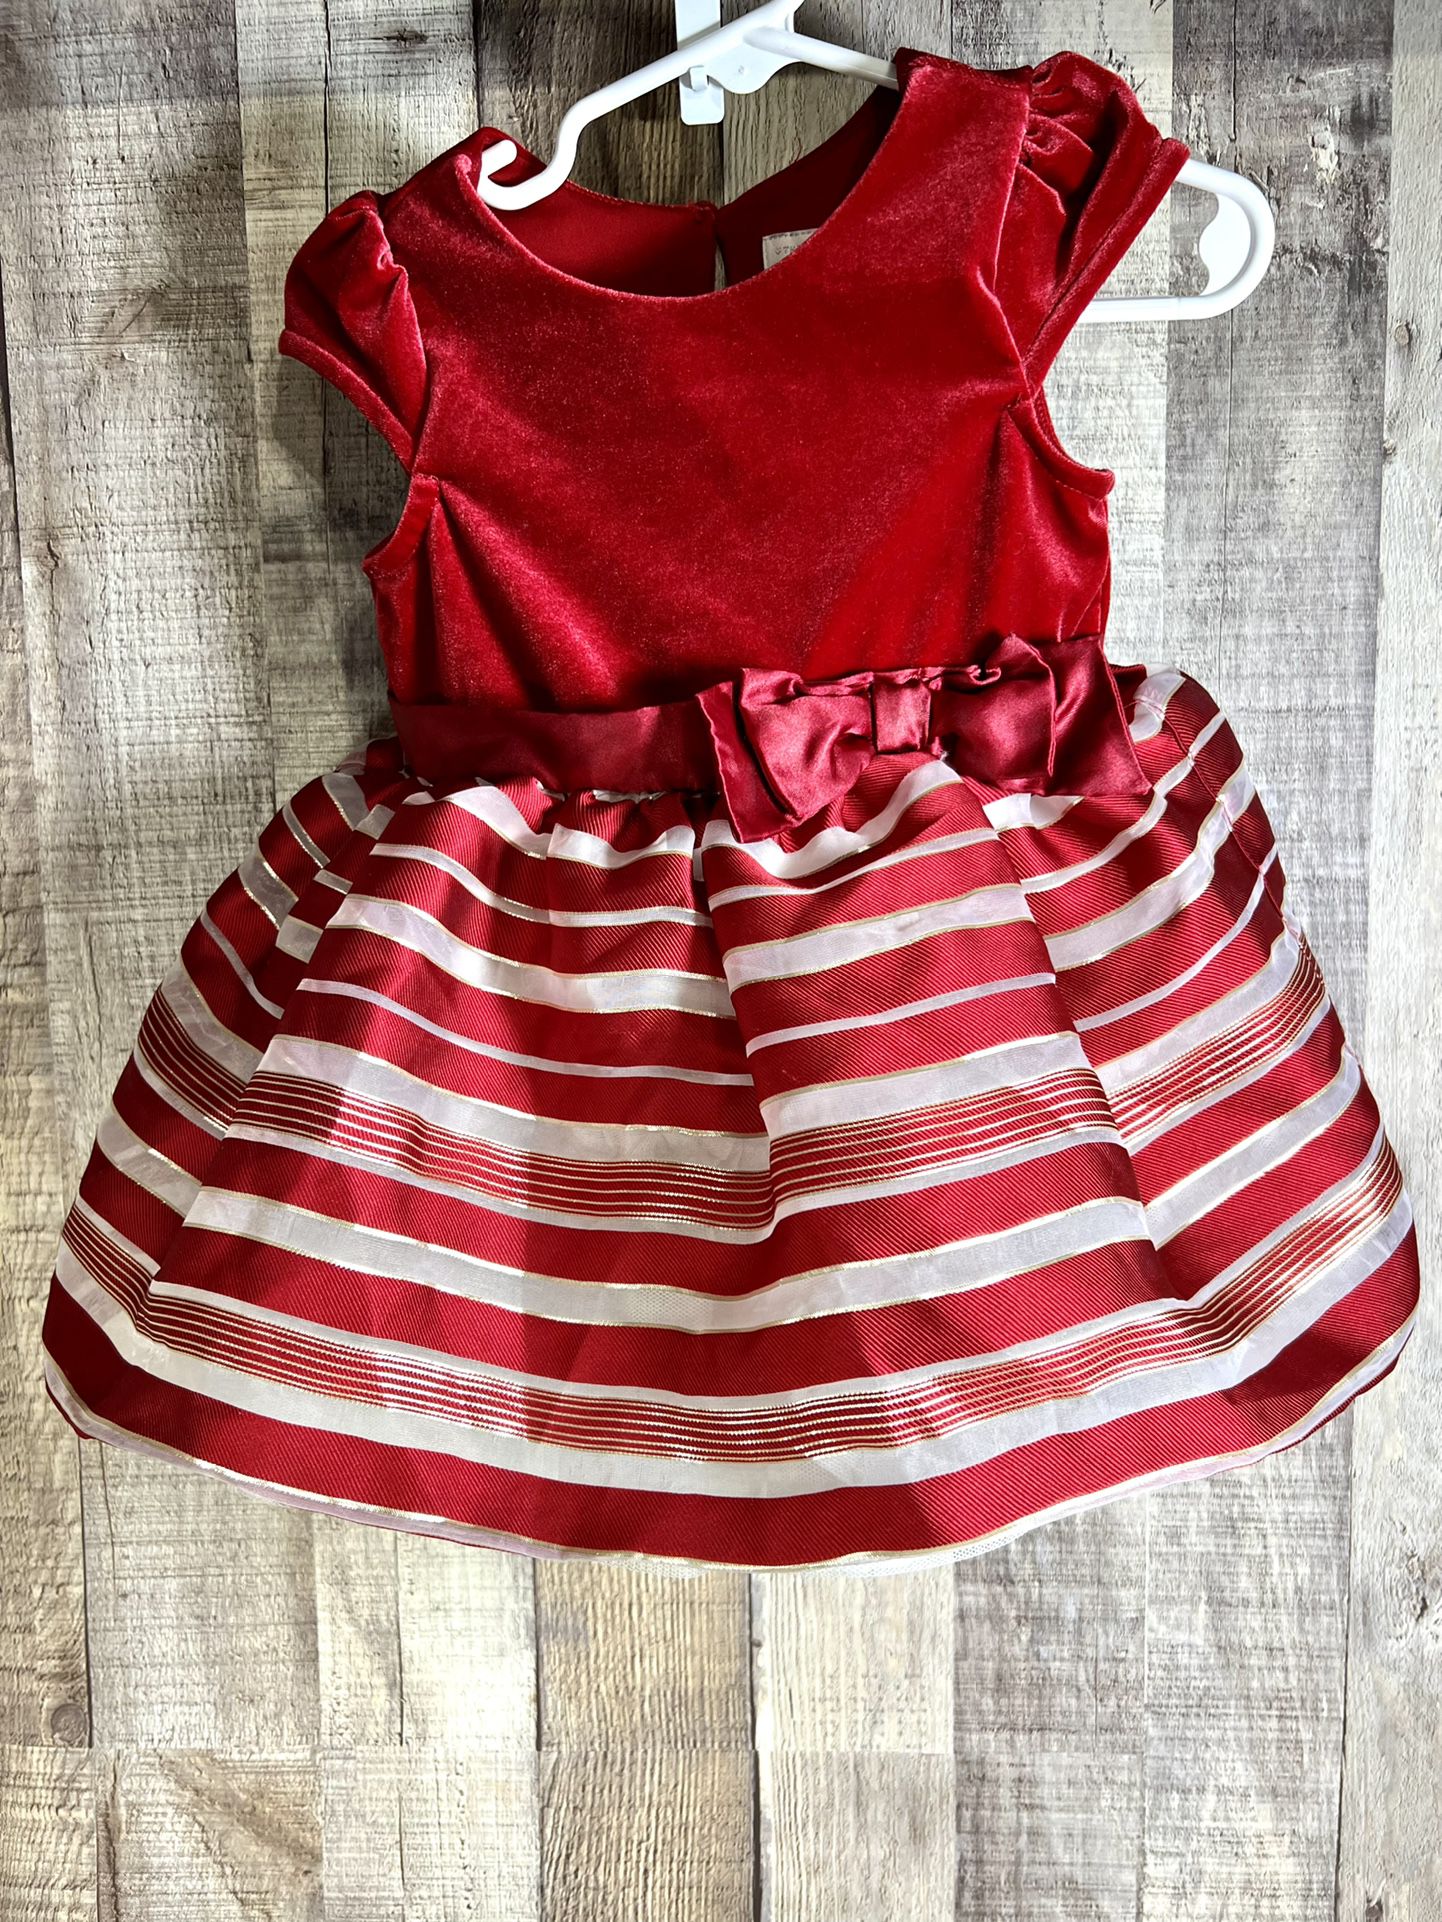 CHILDRENS PLACE CHRISTMAS RED Velvet WHITE w/BOW Gold lined DRESS! 12/18 Months